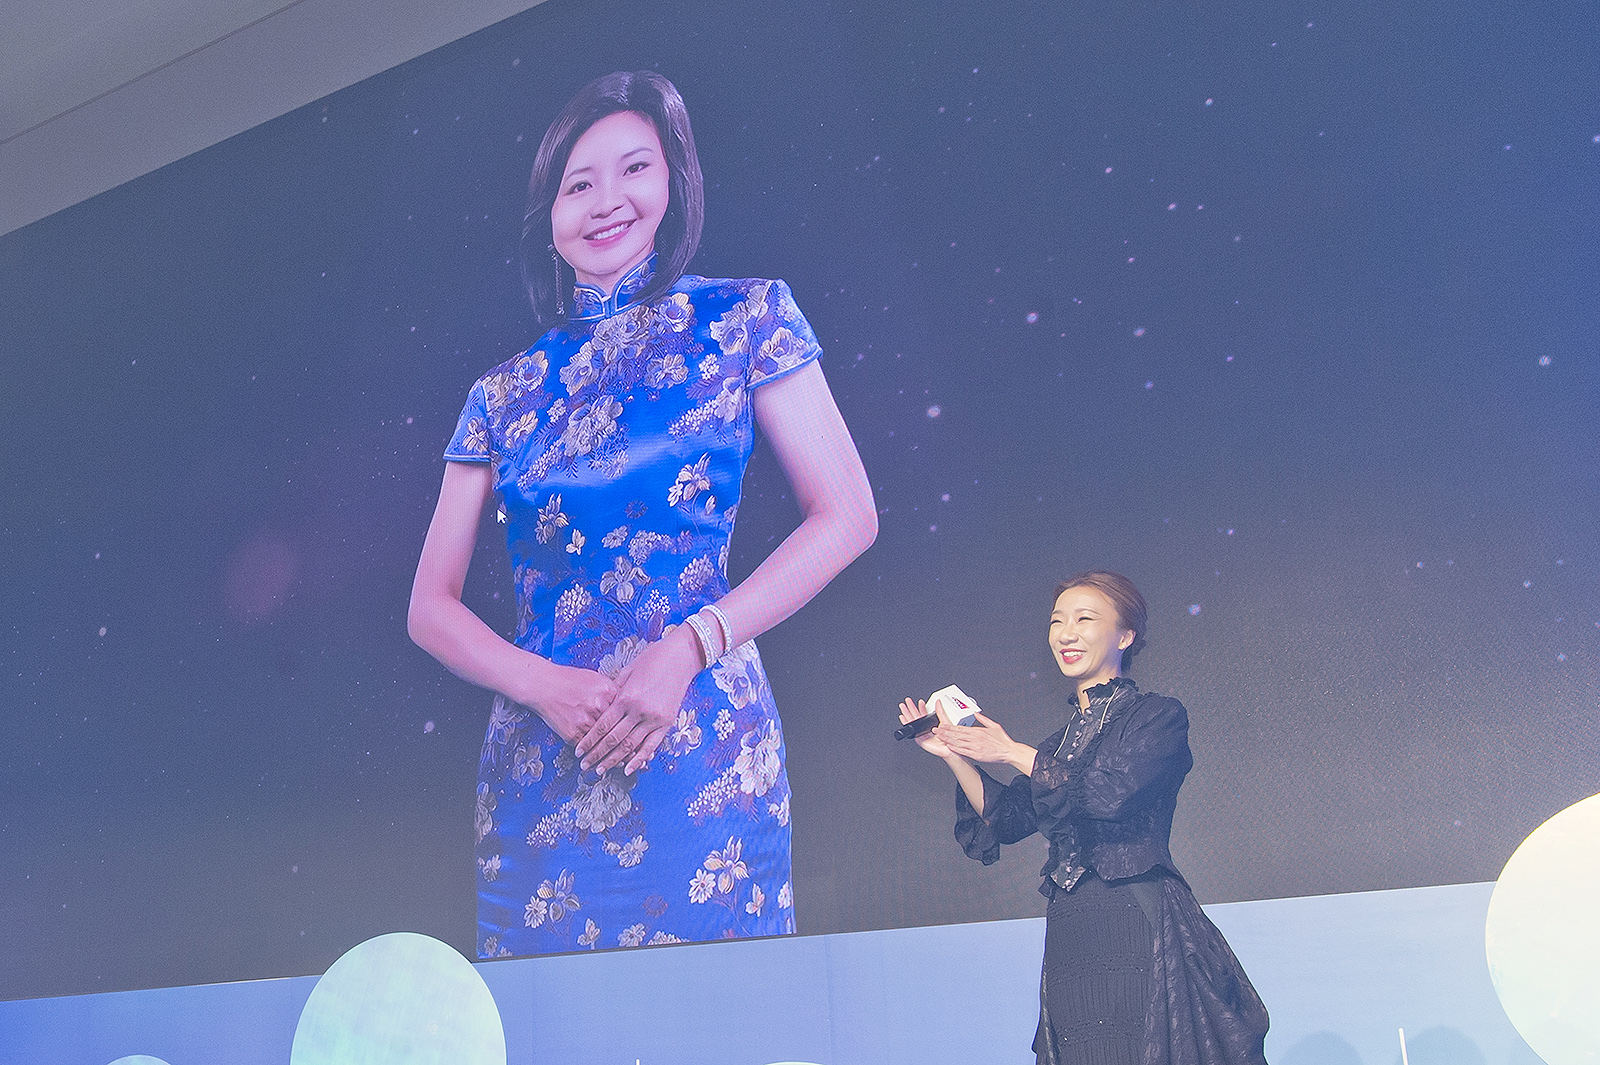 Special thanks to Digital Domain Holdings Limited for technological sponsorship of the singing performance of Ms Angela Yeung and the staging of Virtual Human Teresa Teng.